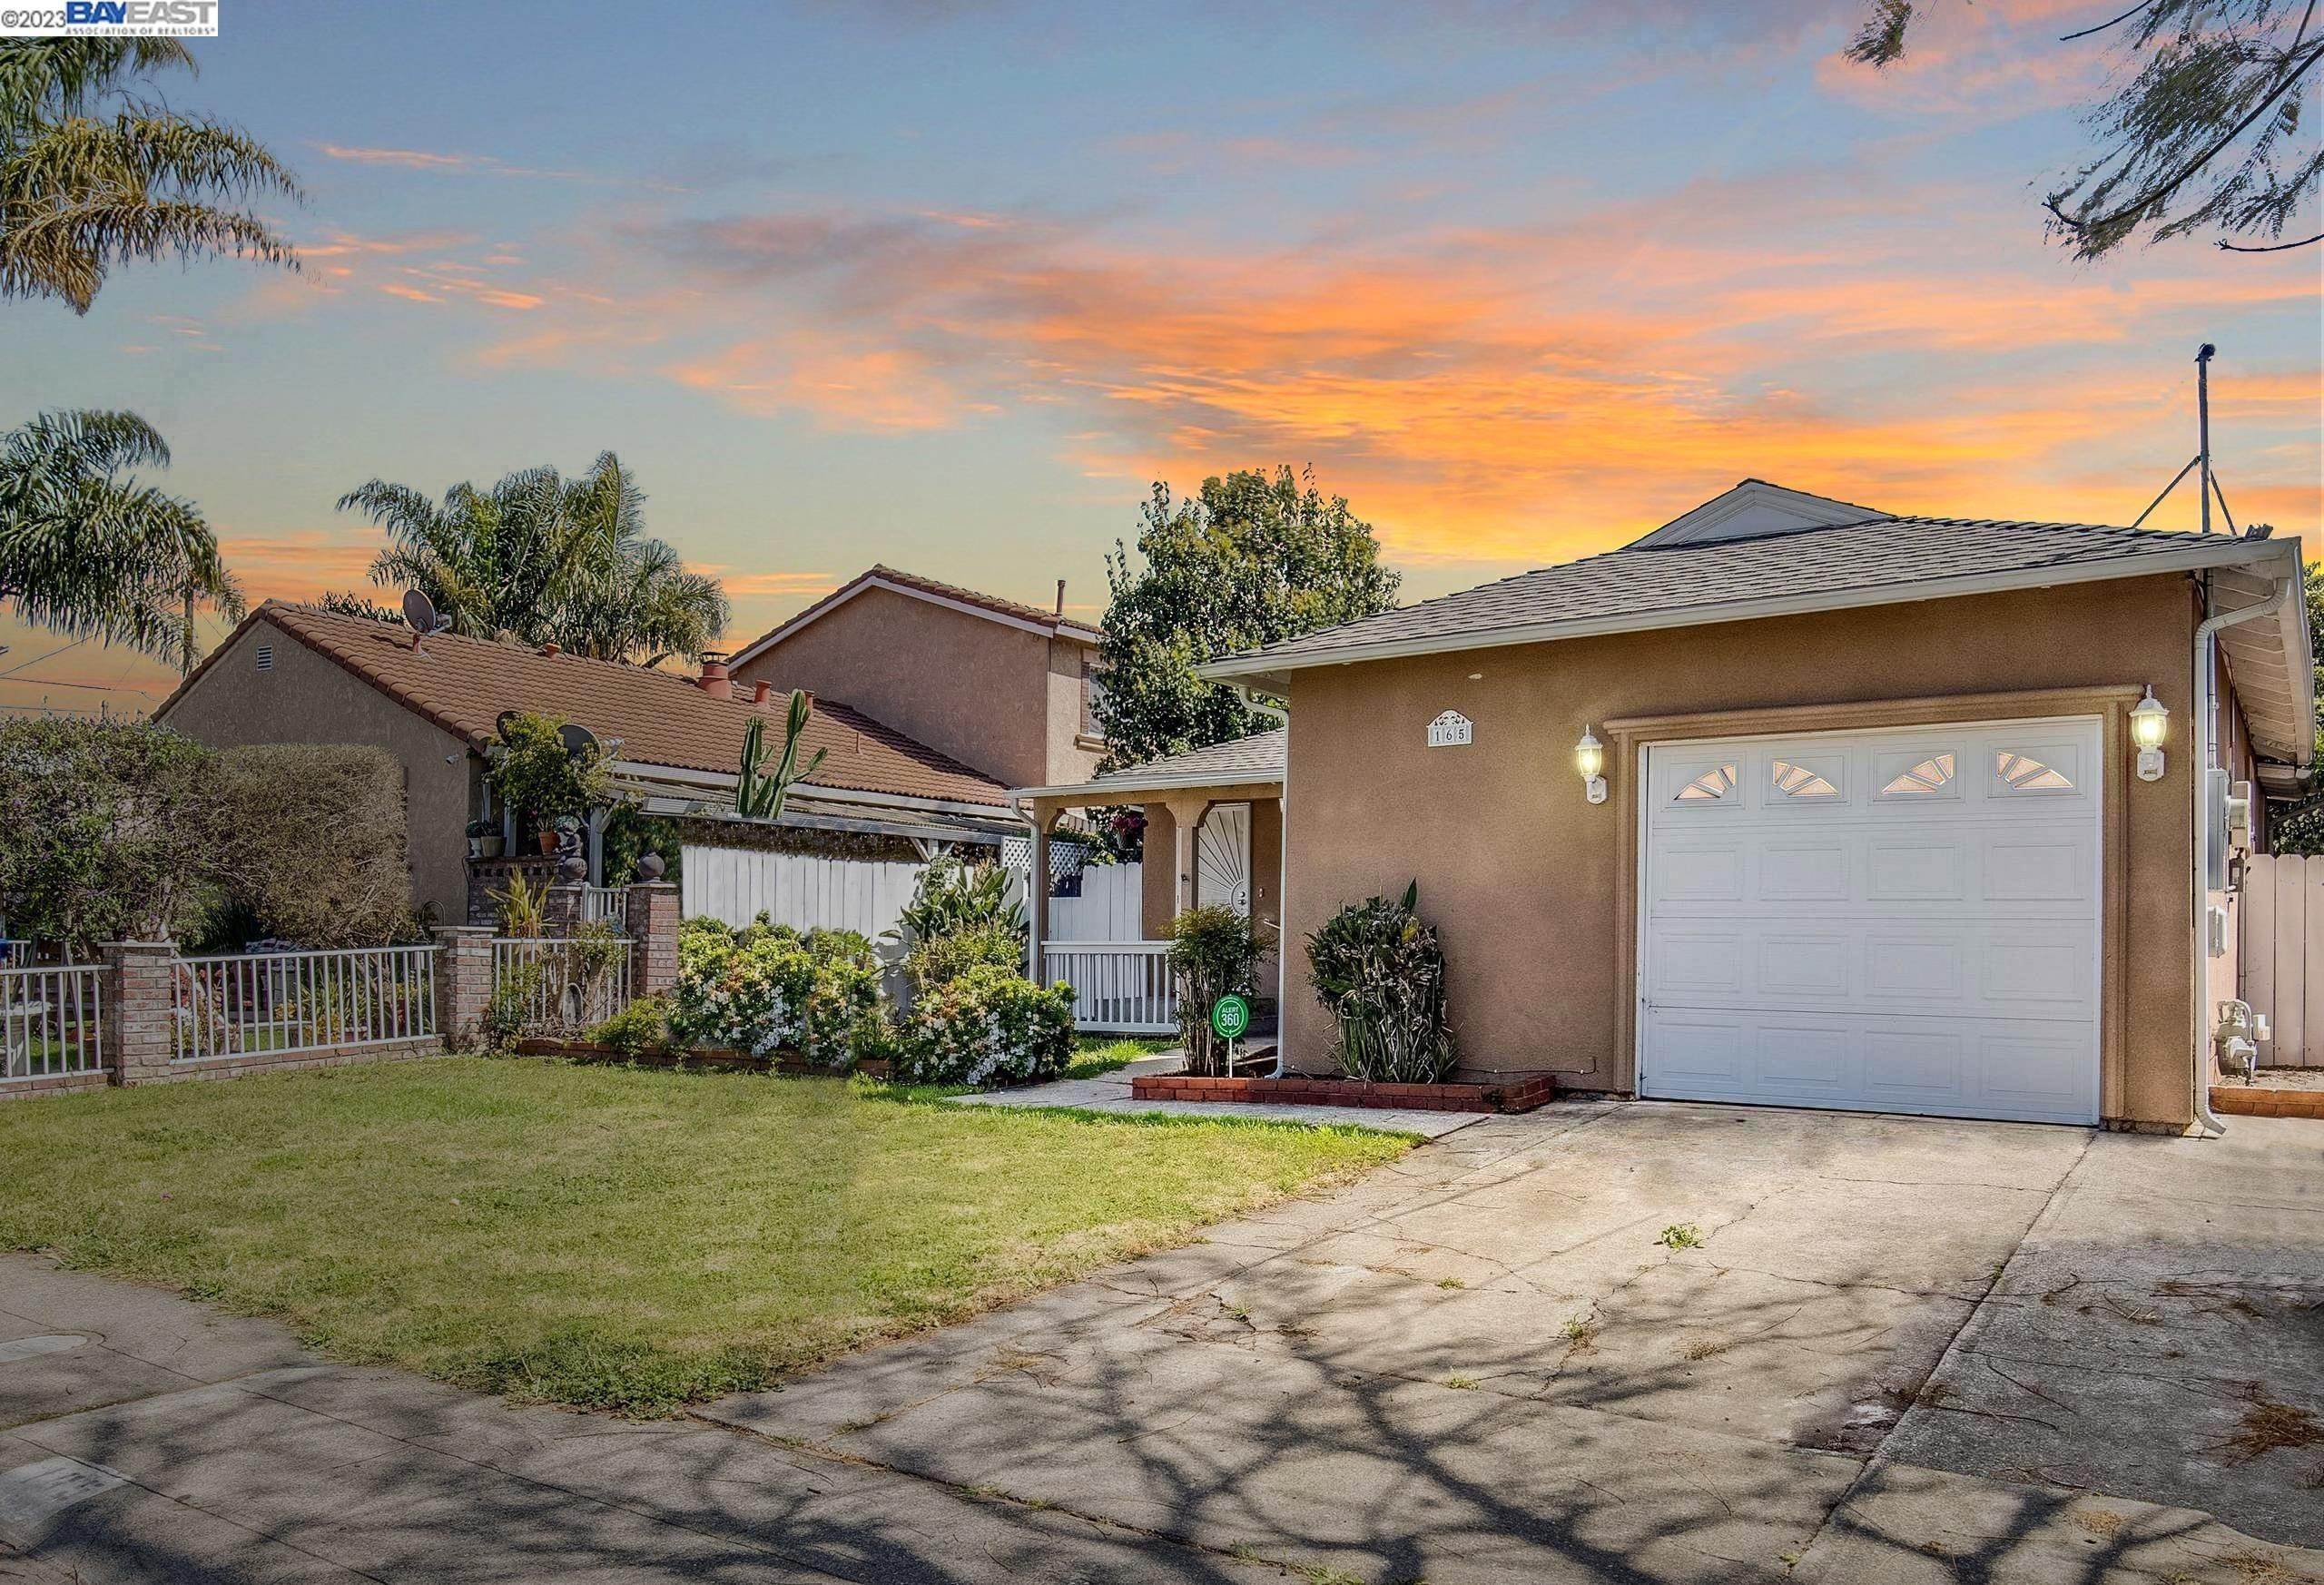 2. Single Family for Sale at Hayward, CA 94544